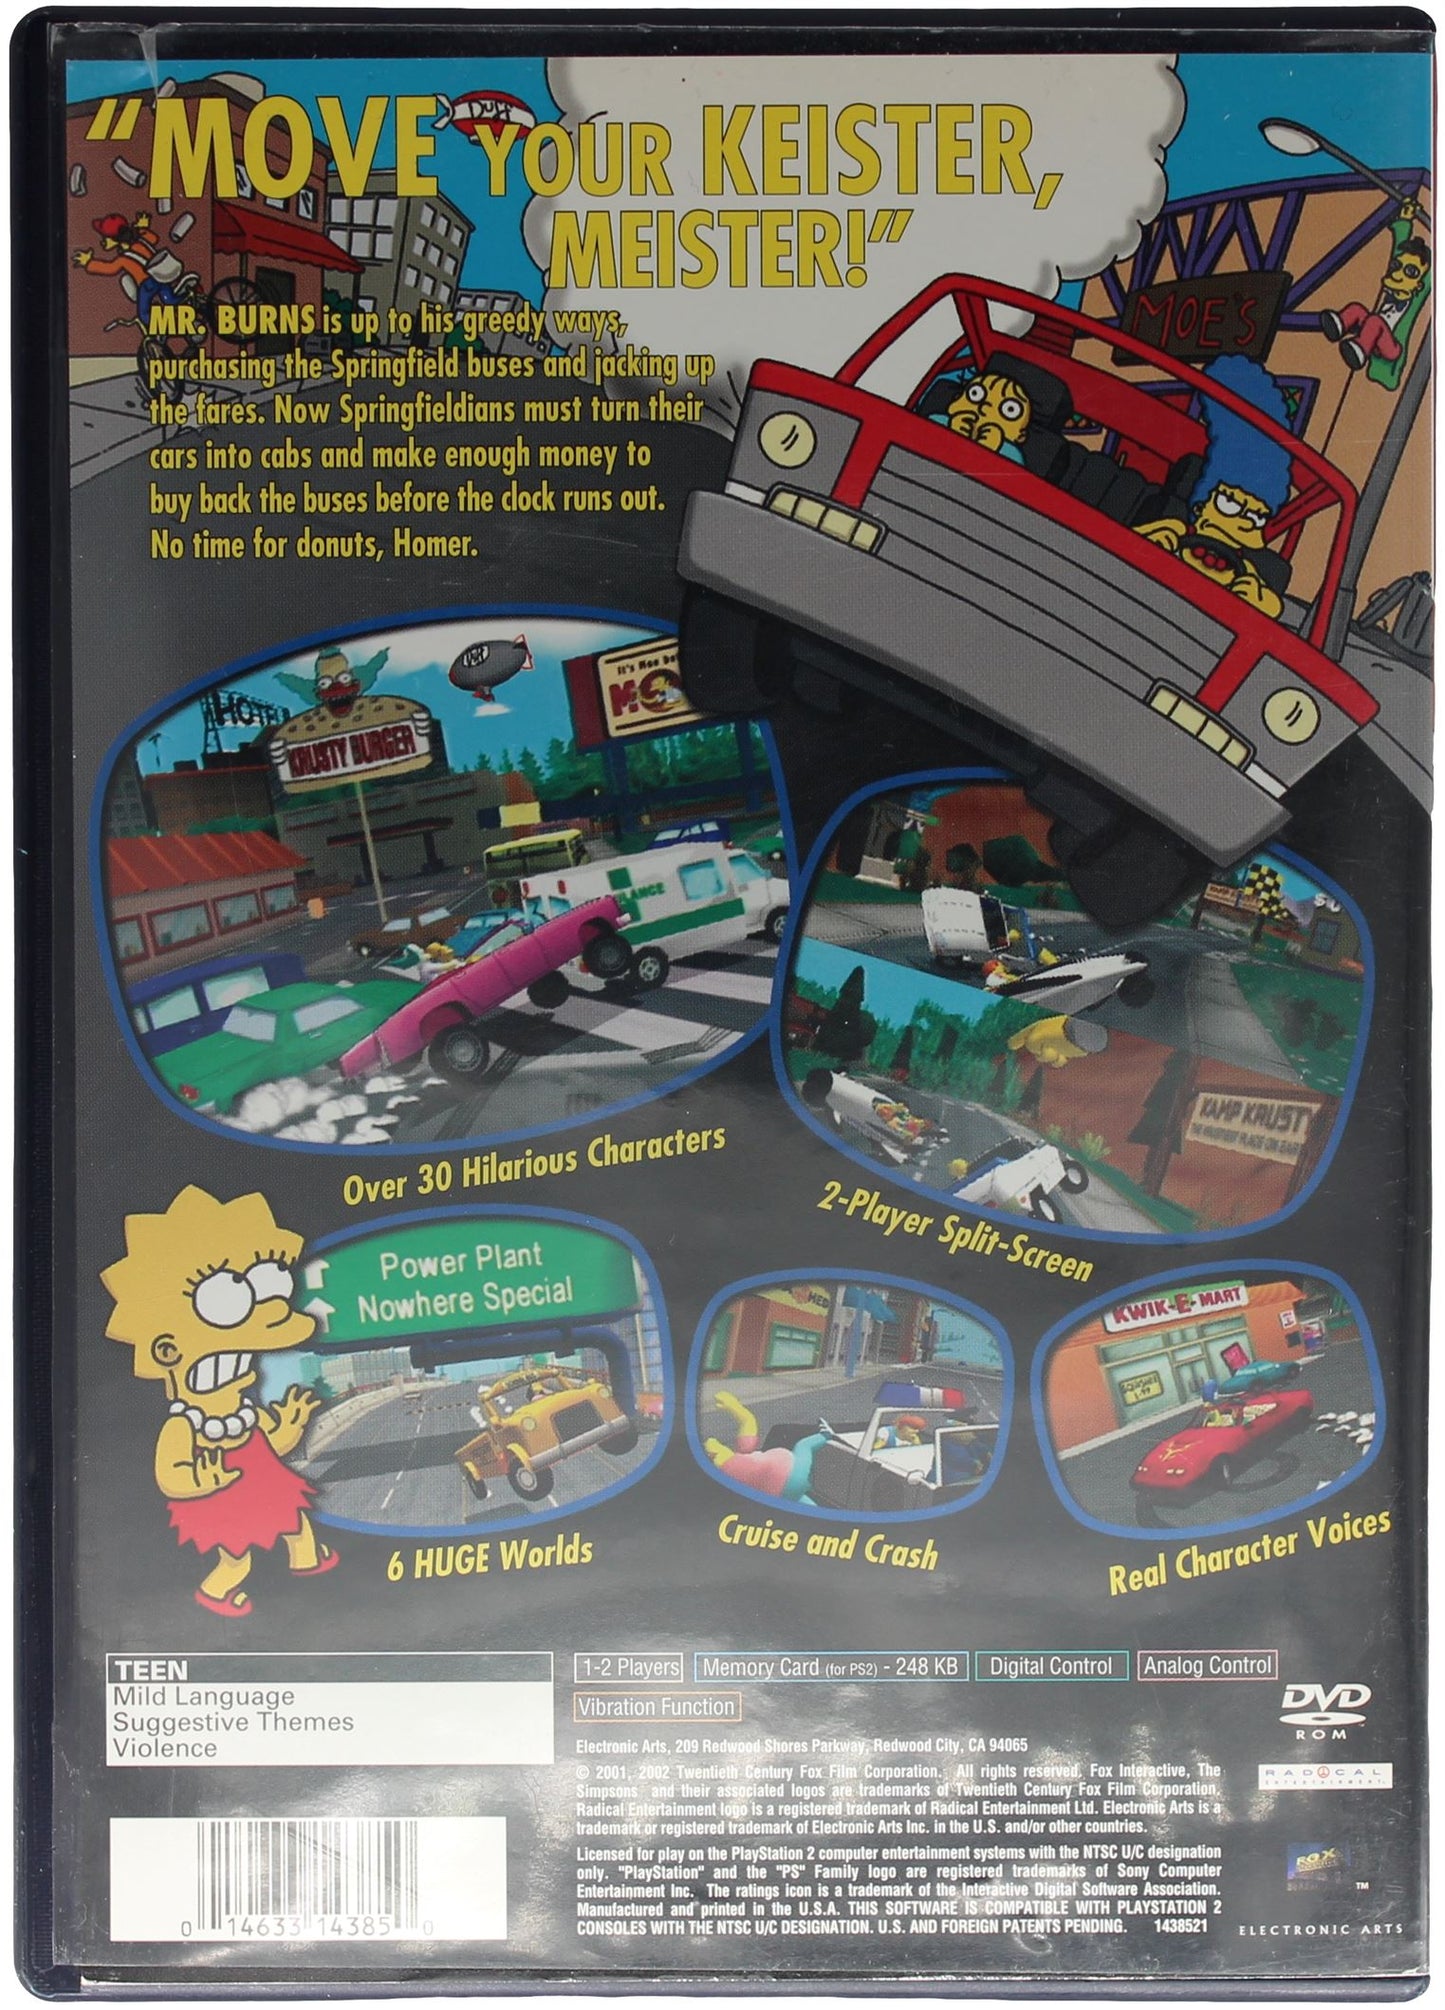 The Simpsons: Road Rage (PS2)